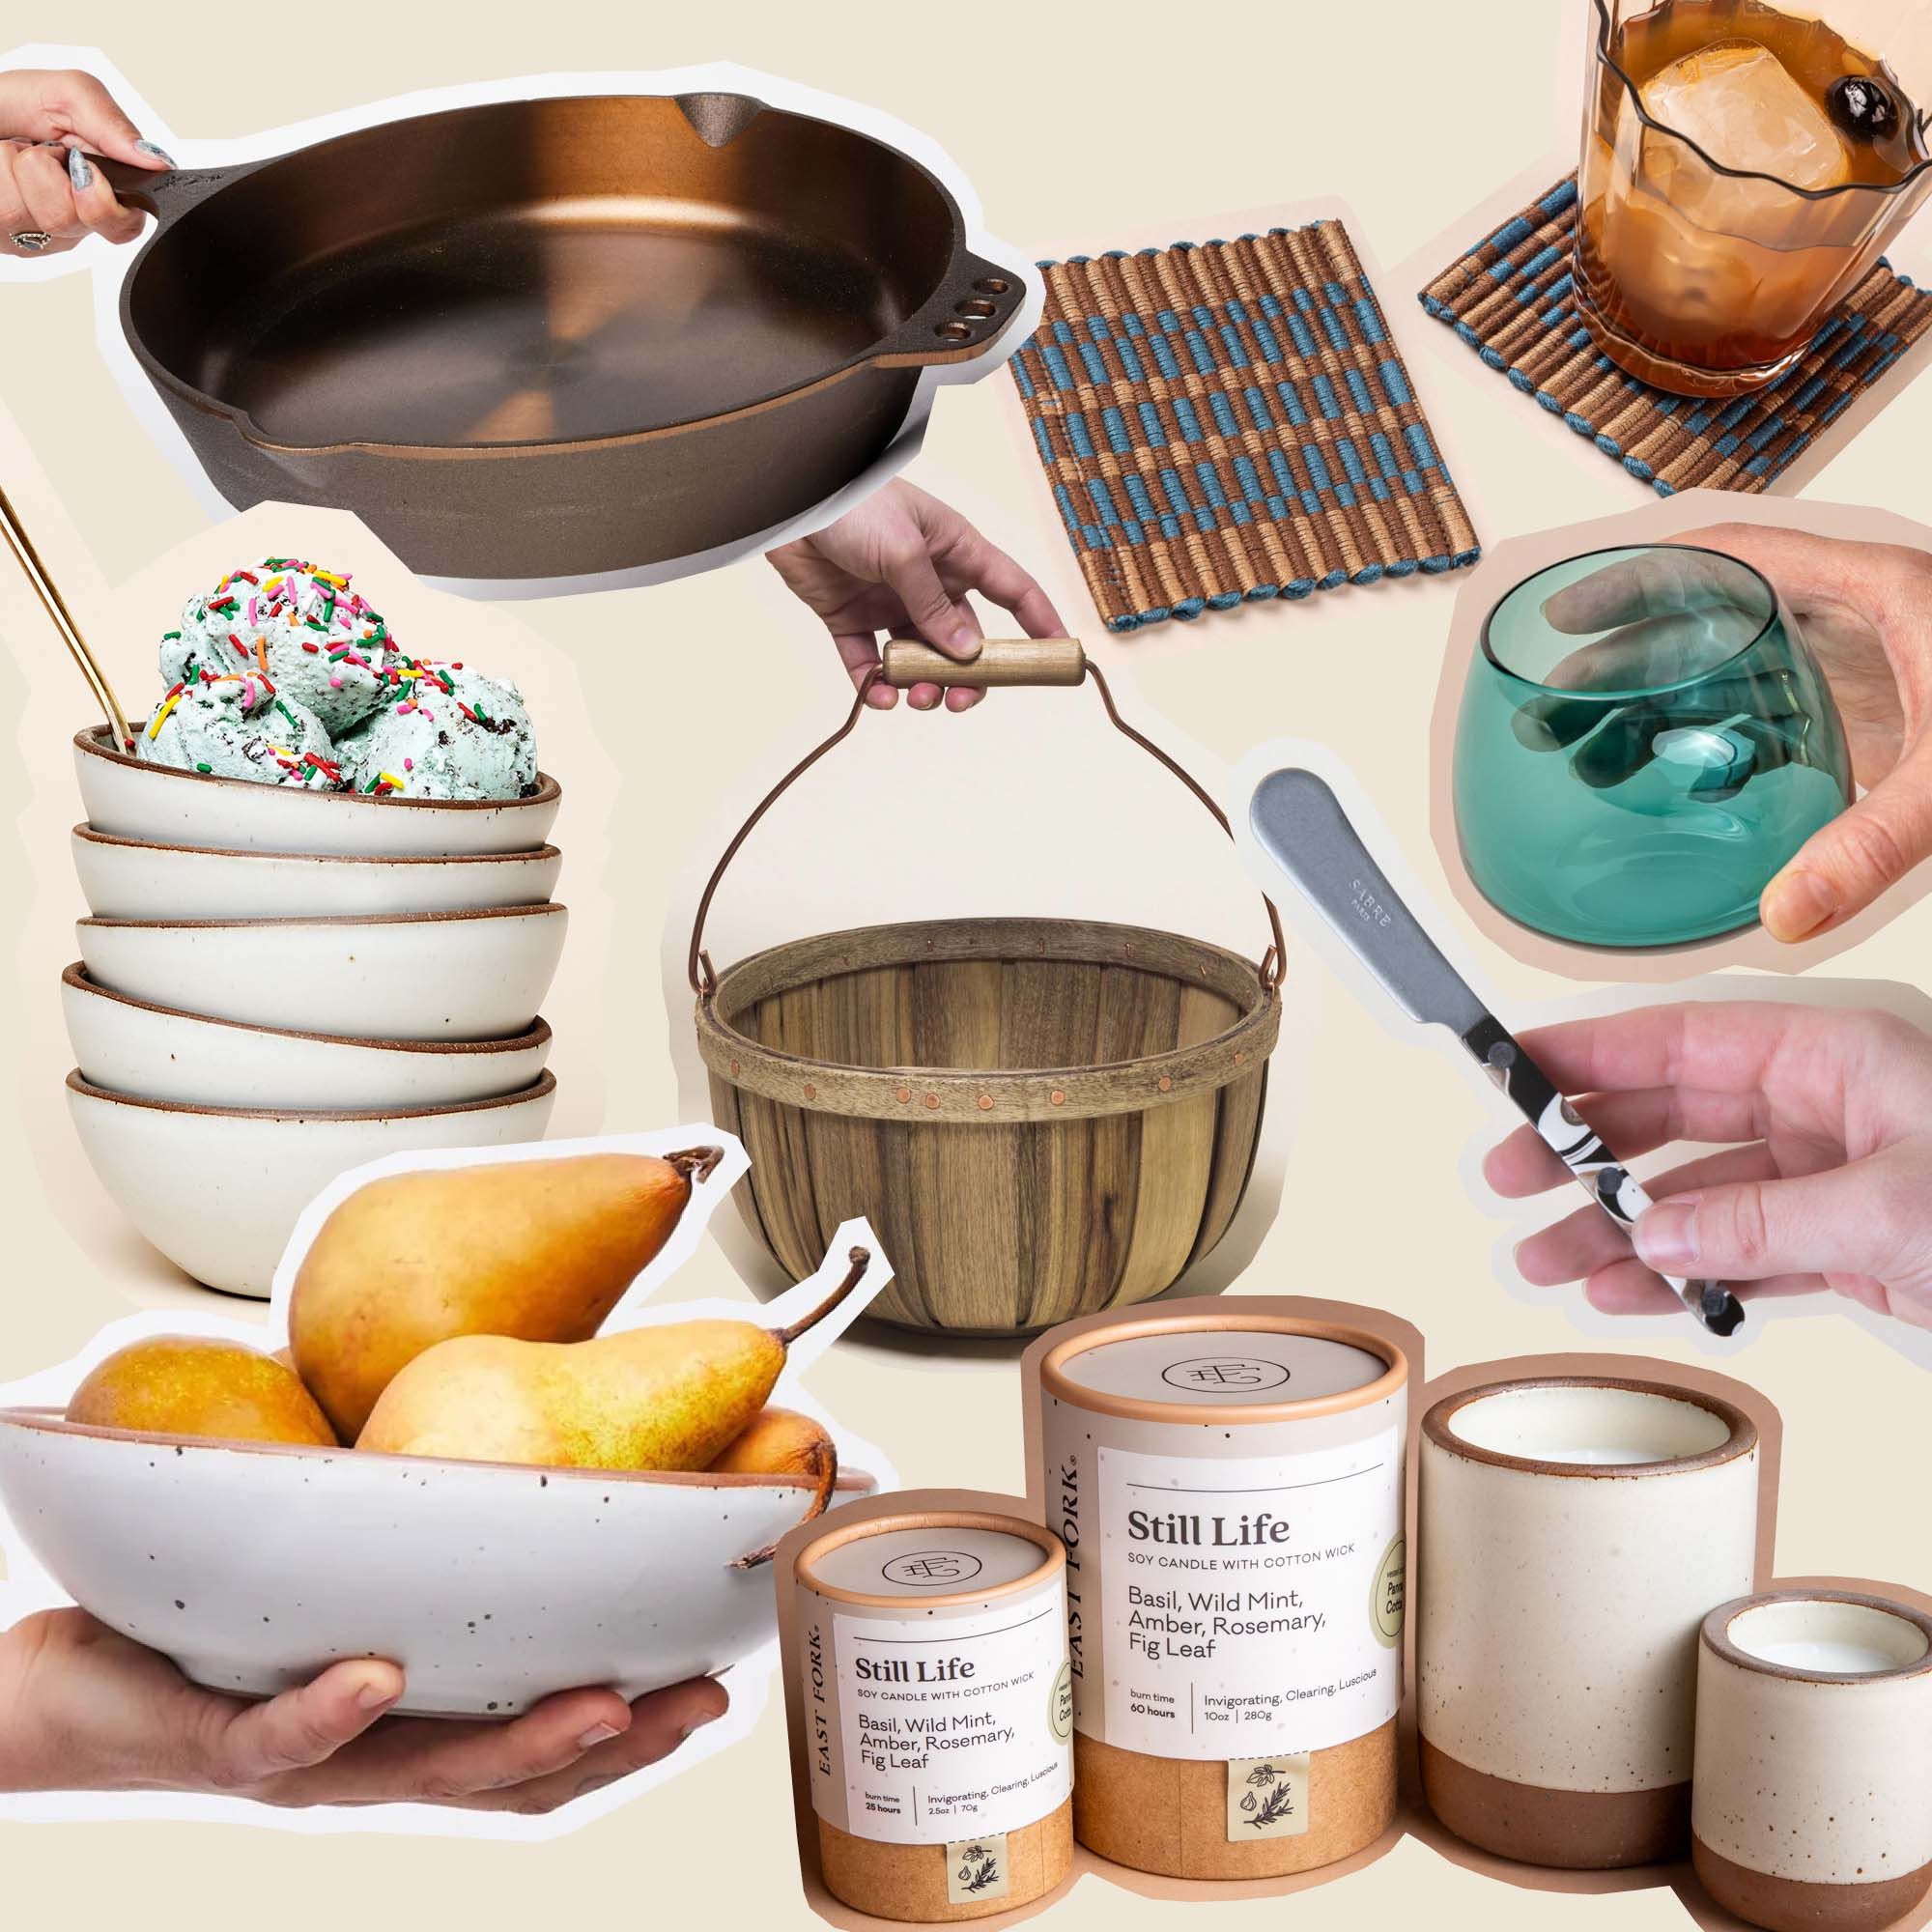 A collage-style photo of different cut out items like candles, a skillet, bowls, coasters, glassware and more.